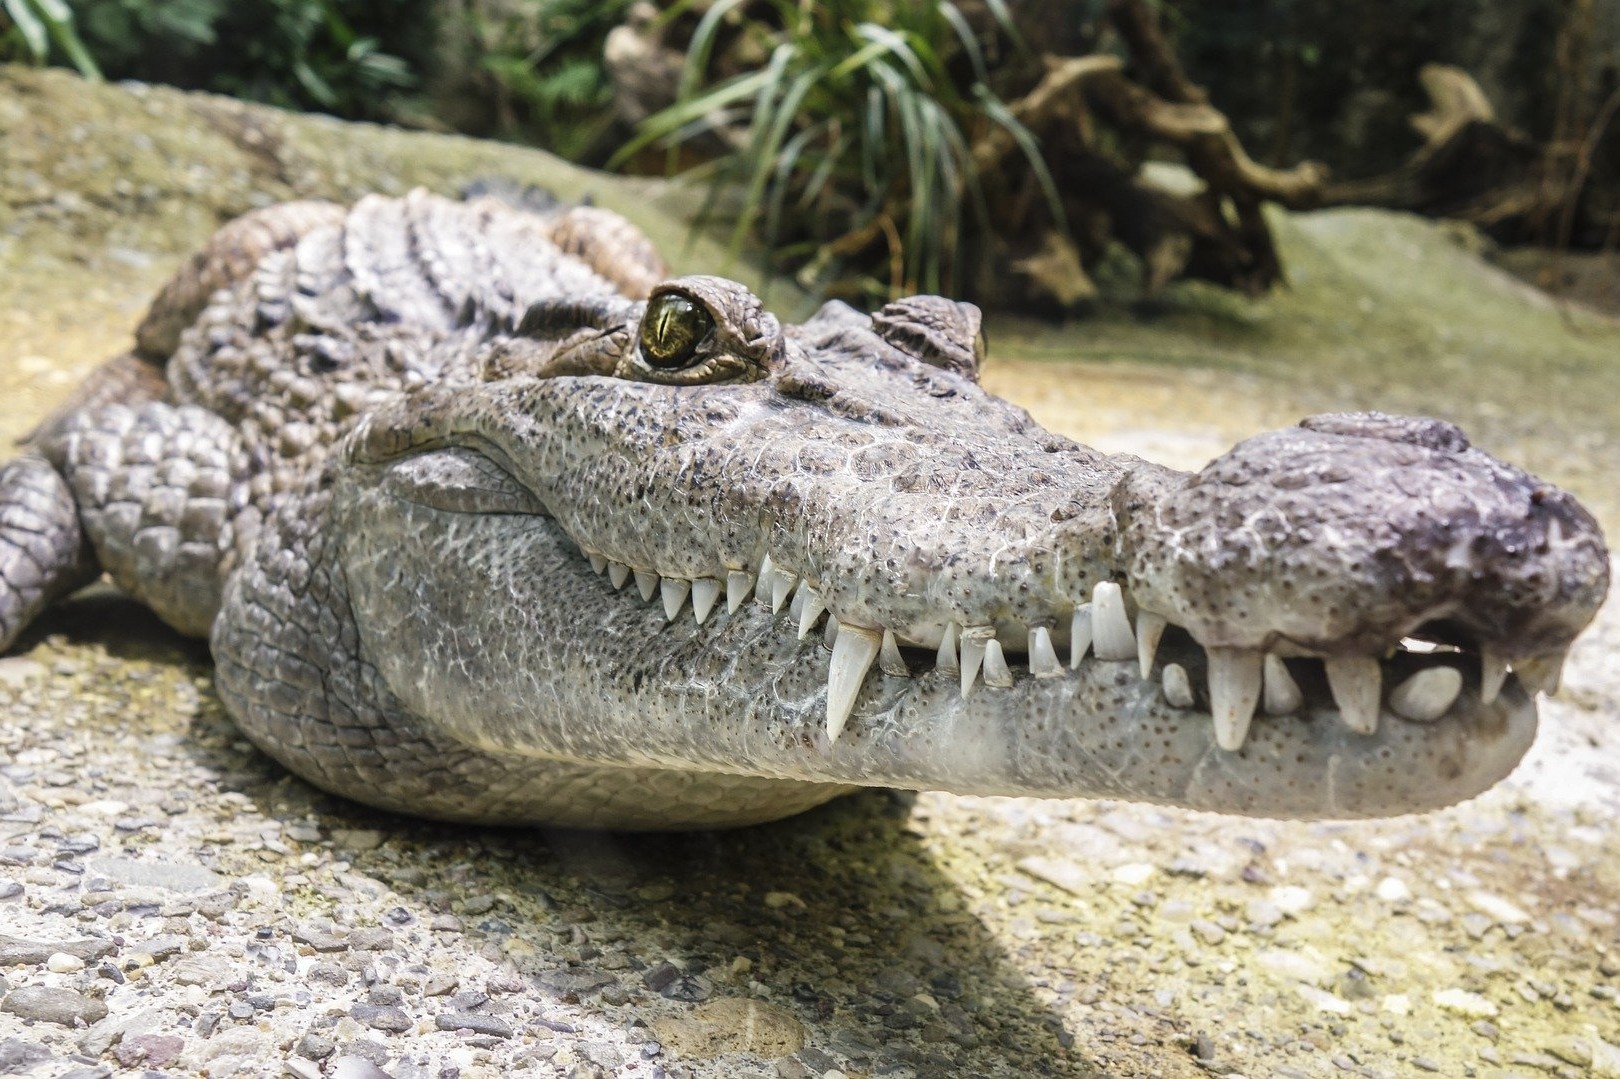 Crocodiles: Facts And Photos Of Some Of The Toothiest Reptiles